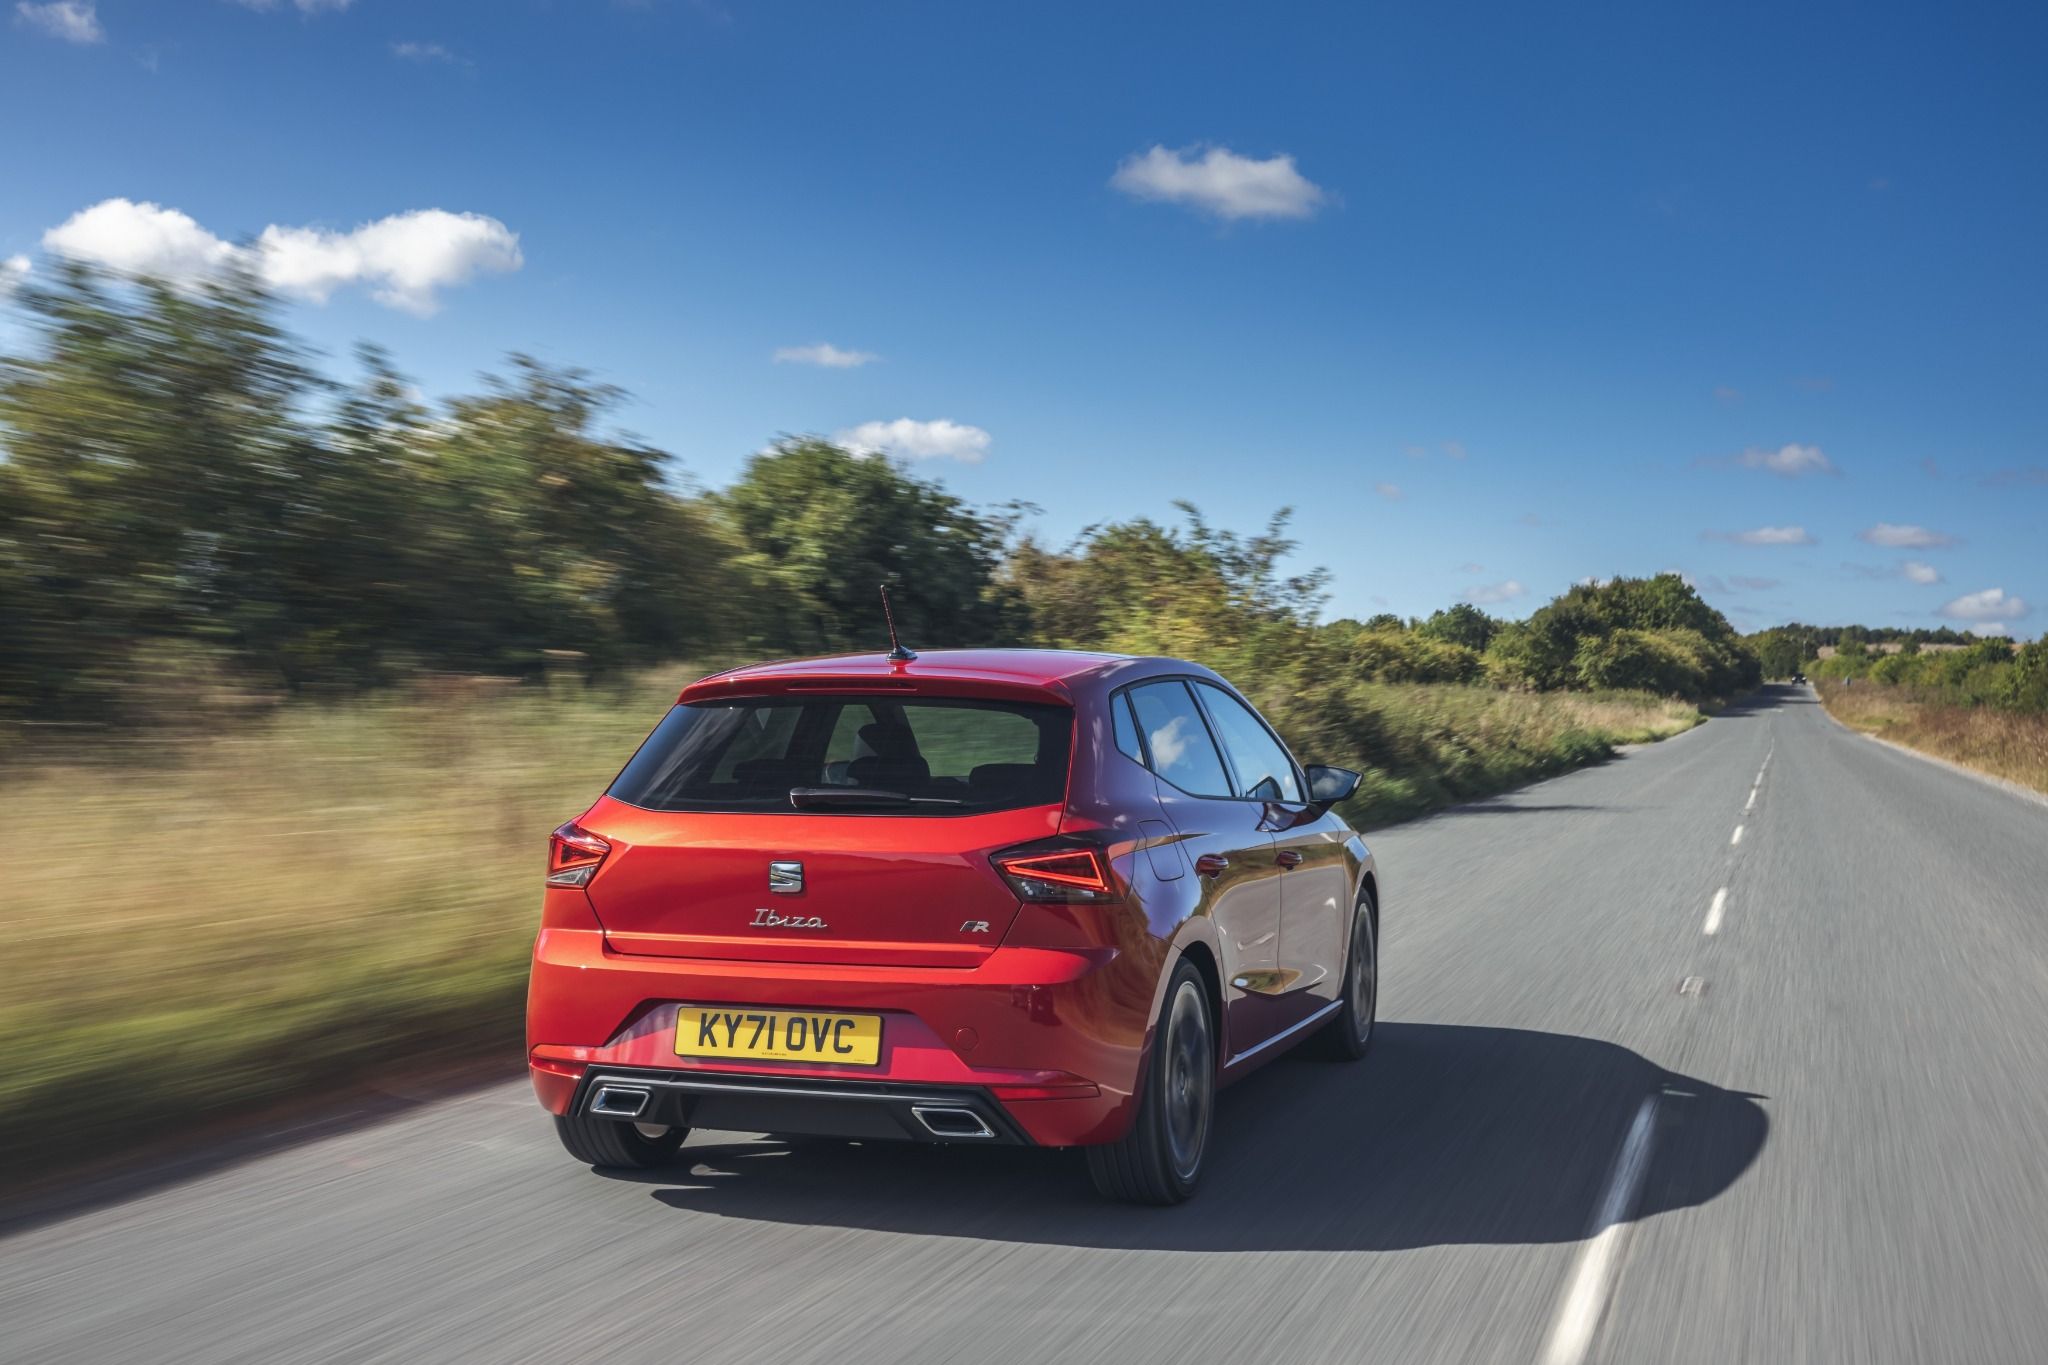 2021 SEAT Ibiza FR in Desire Red